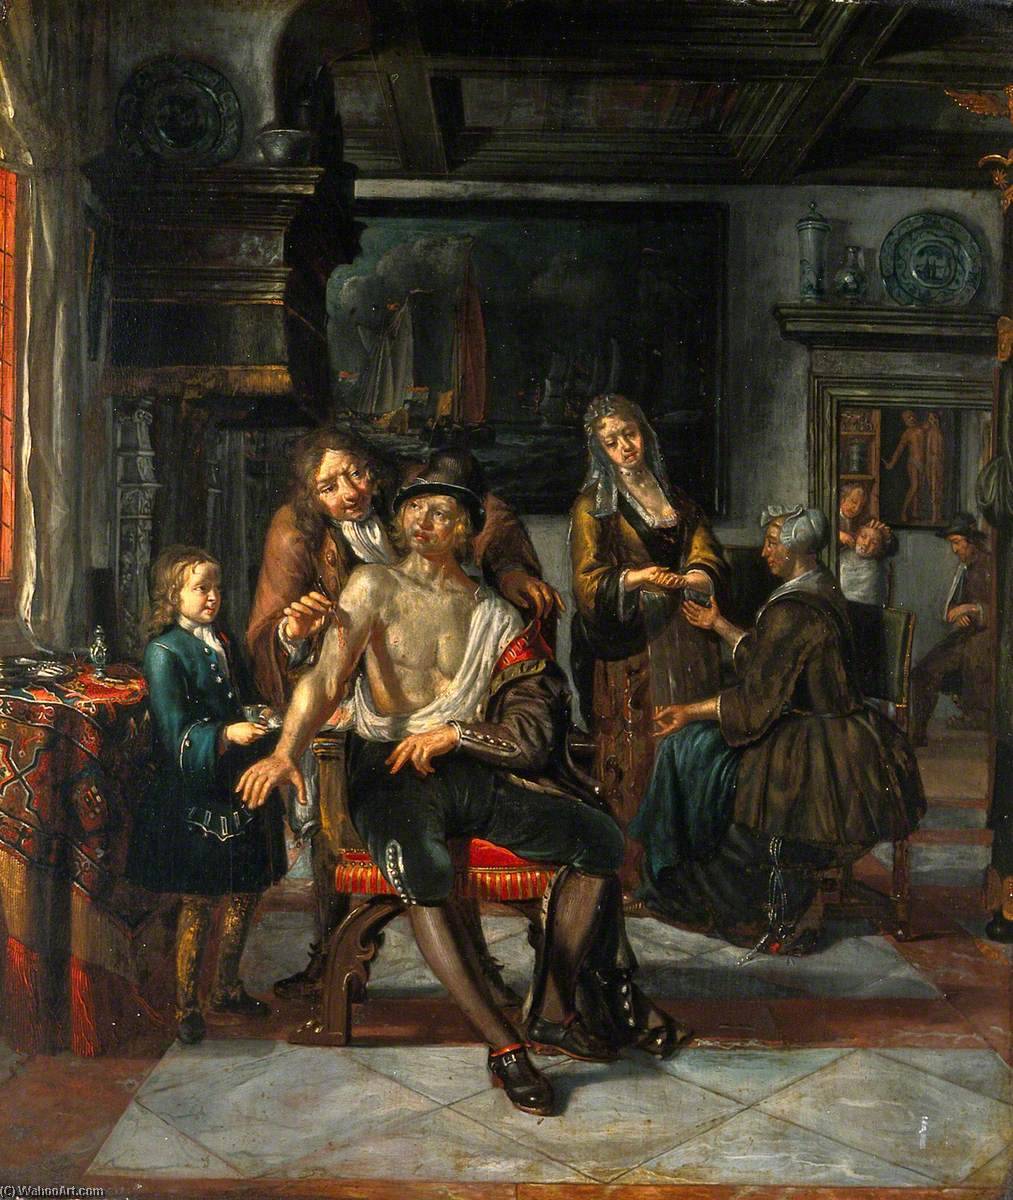 WikiOO.org - Güzel Sanatlar Ansiklopedisi - Resim, Resimler Matthijs Naiveu - Interior of a Surgery with a Surgeon Treating a Wound in the Arm of a Man, with a Boy and Five Other Figures